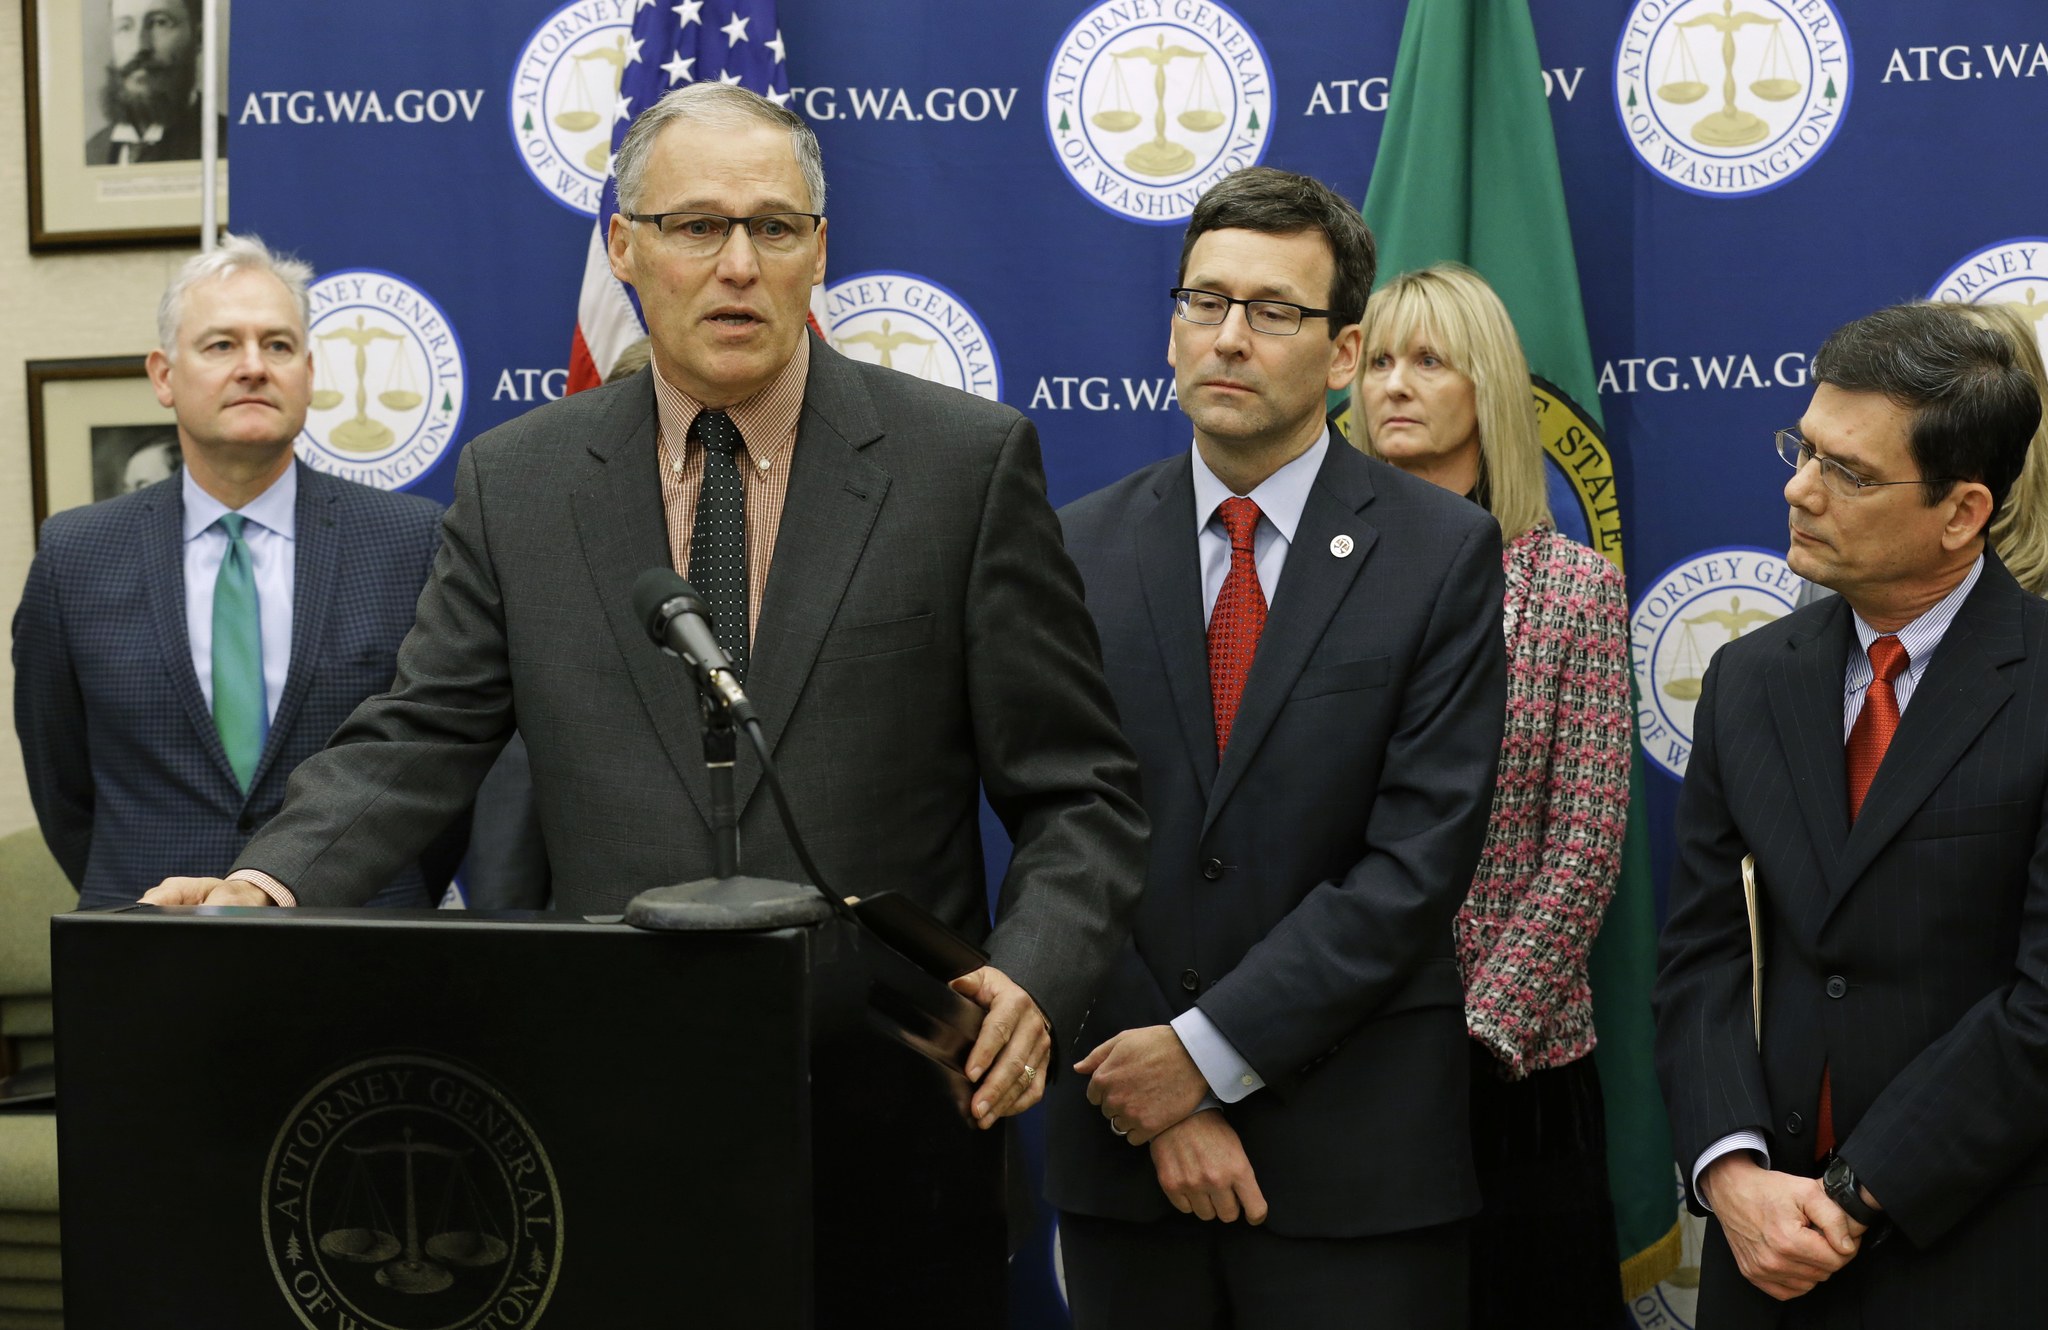 In this Jan. 16, 2017, photo, Washington Gov. Jay Inslee, second from left, speaks during a news conference at the Capitol in Olympia to announce that he and Attorney General Bob Ferguson, third from left, have proposed legislation to abolish the death penalty in Washington state. (Ted S. Warren/The Associated Press)